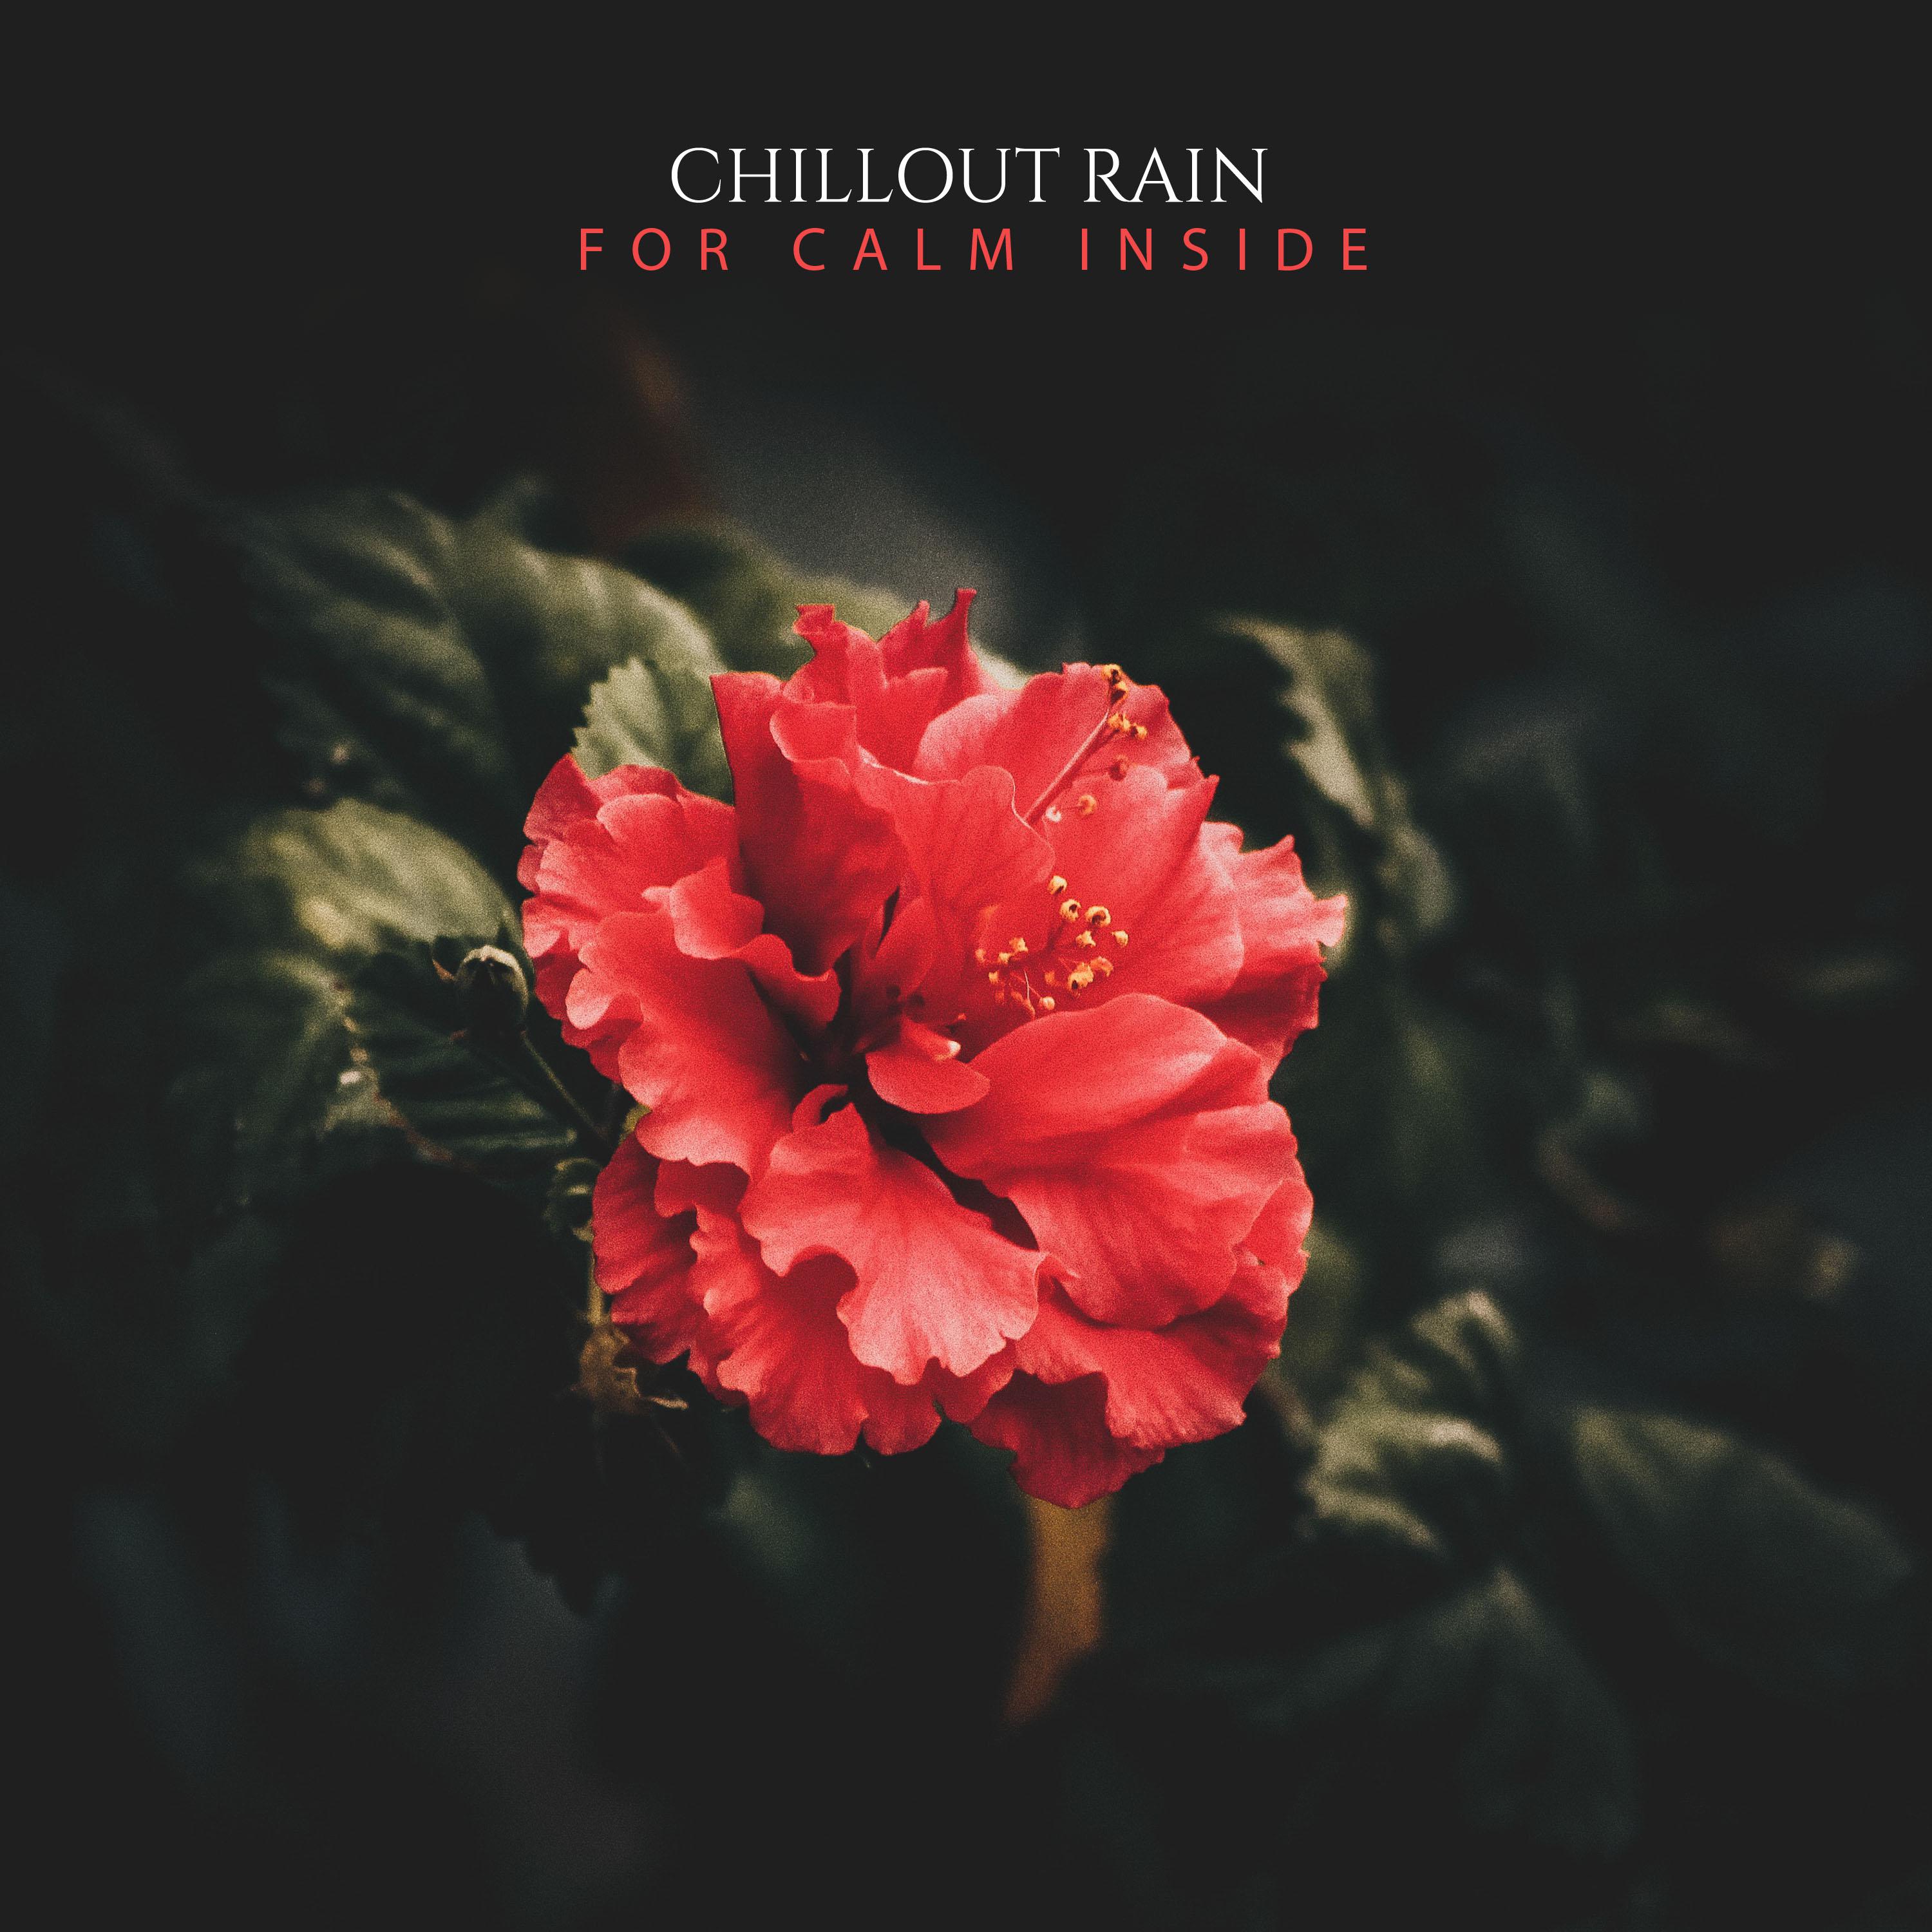 11 Chillout Rain Songs for Calm Inside